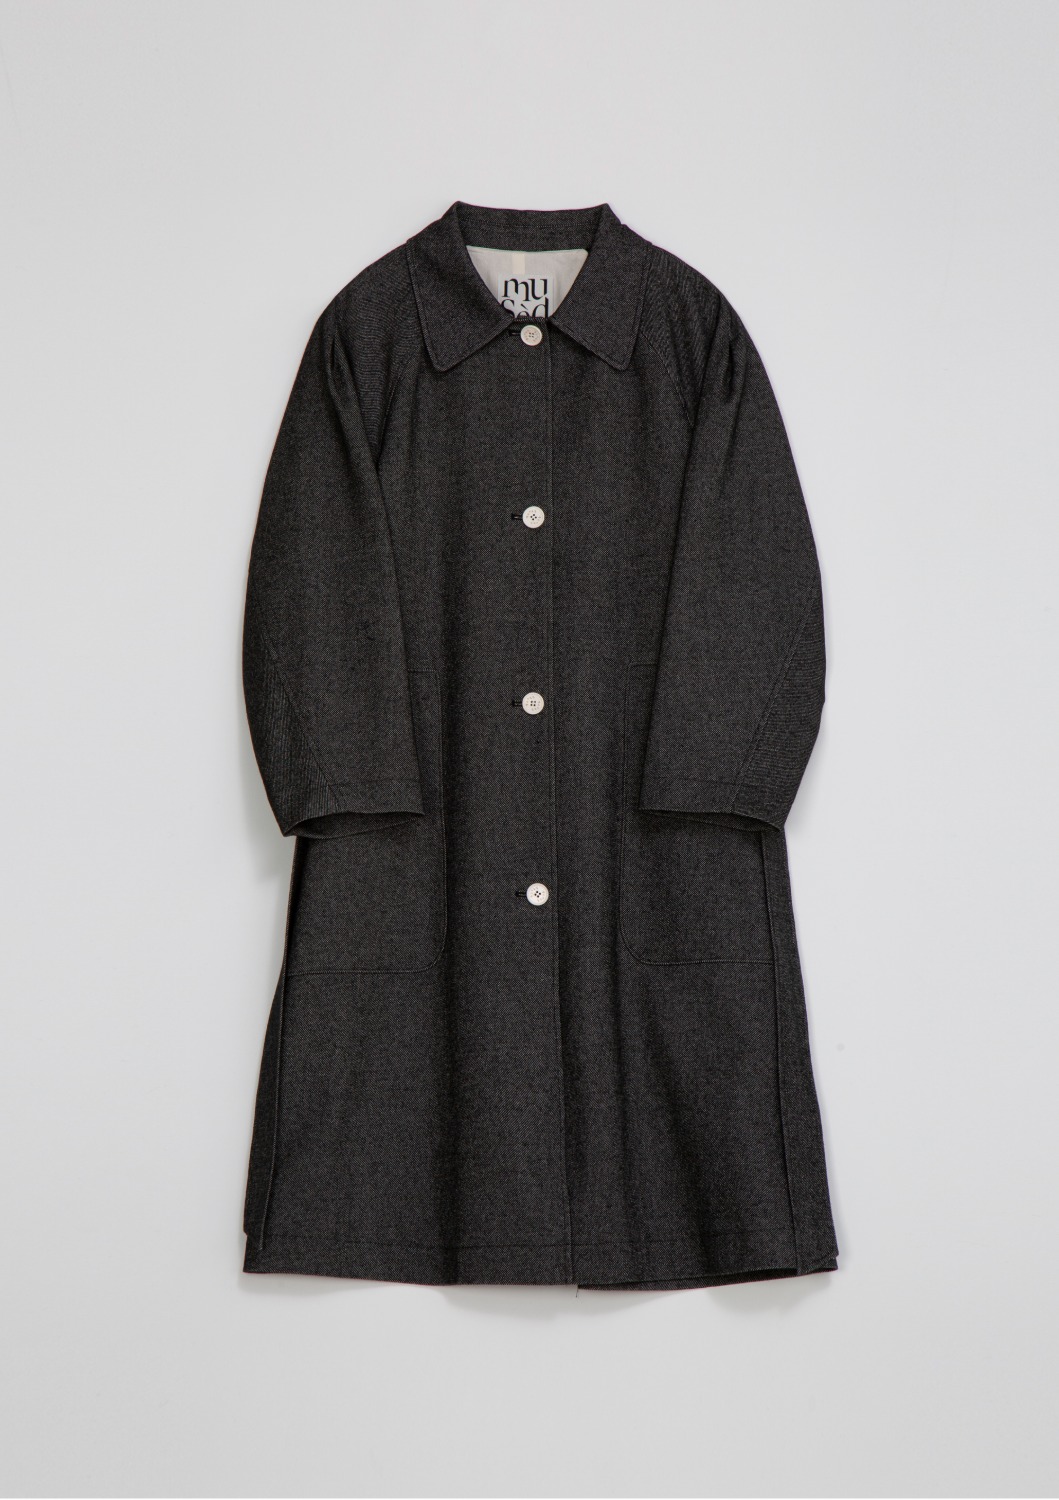 [End Sale]Bon Trench Coat - Black Twill Wool-cotton Blended Italian Fabric